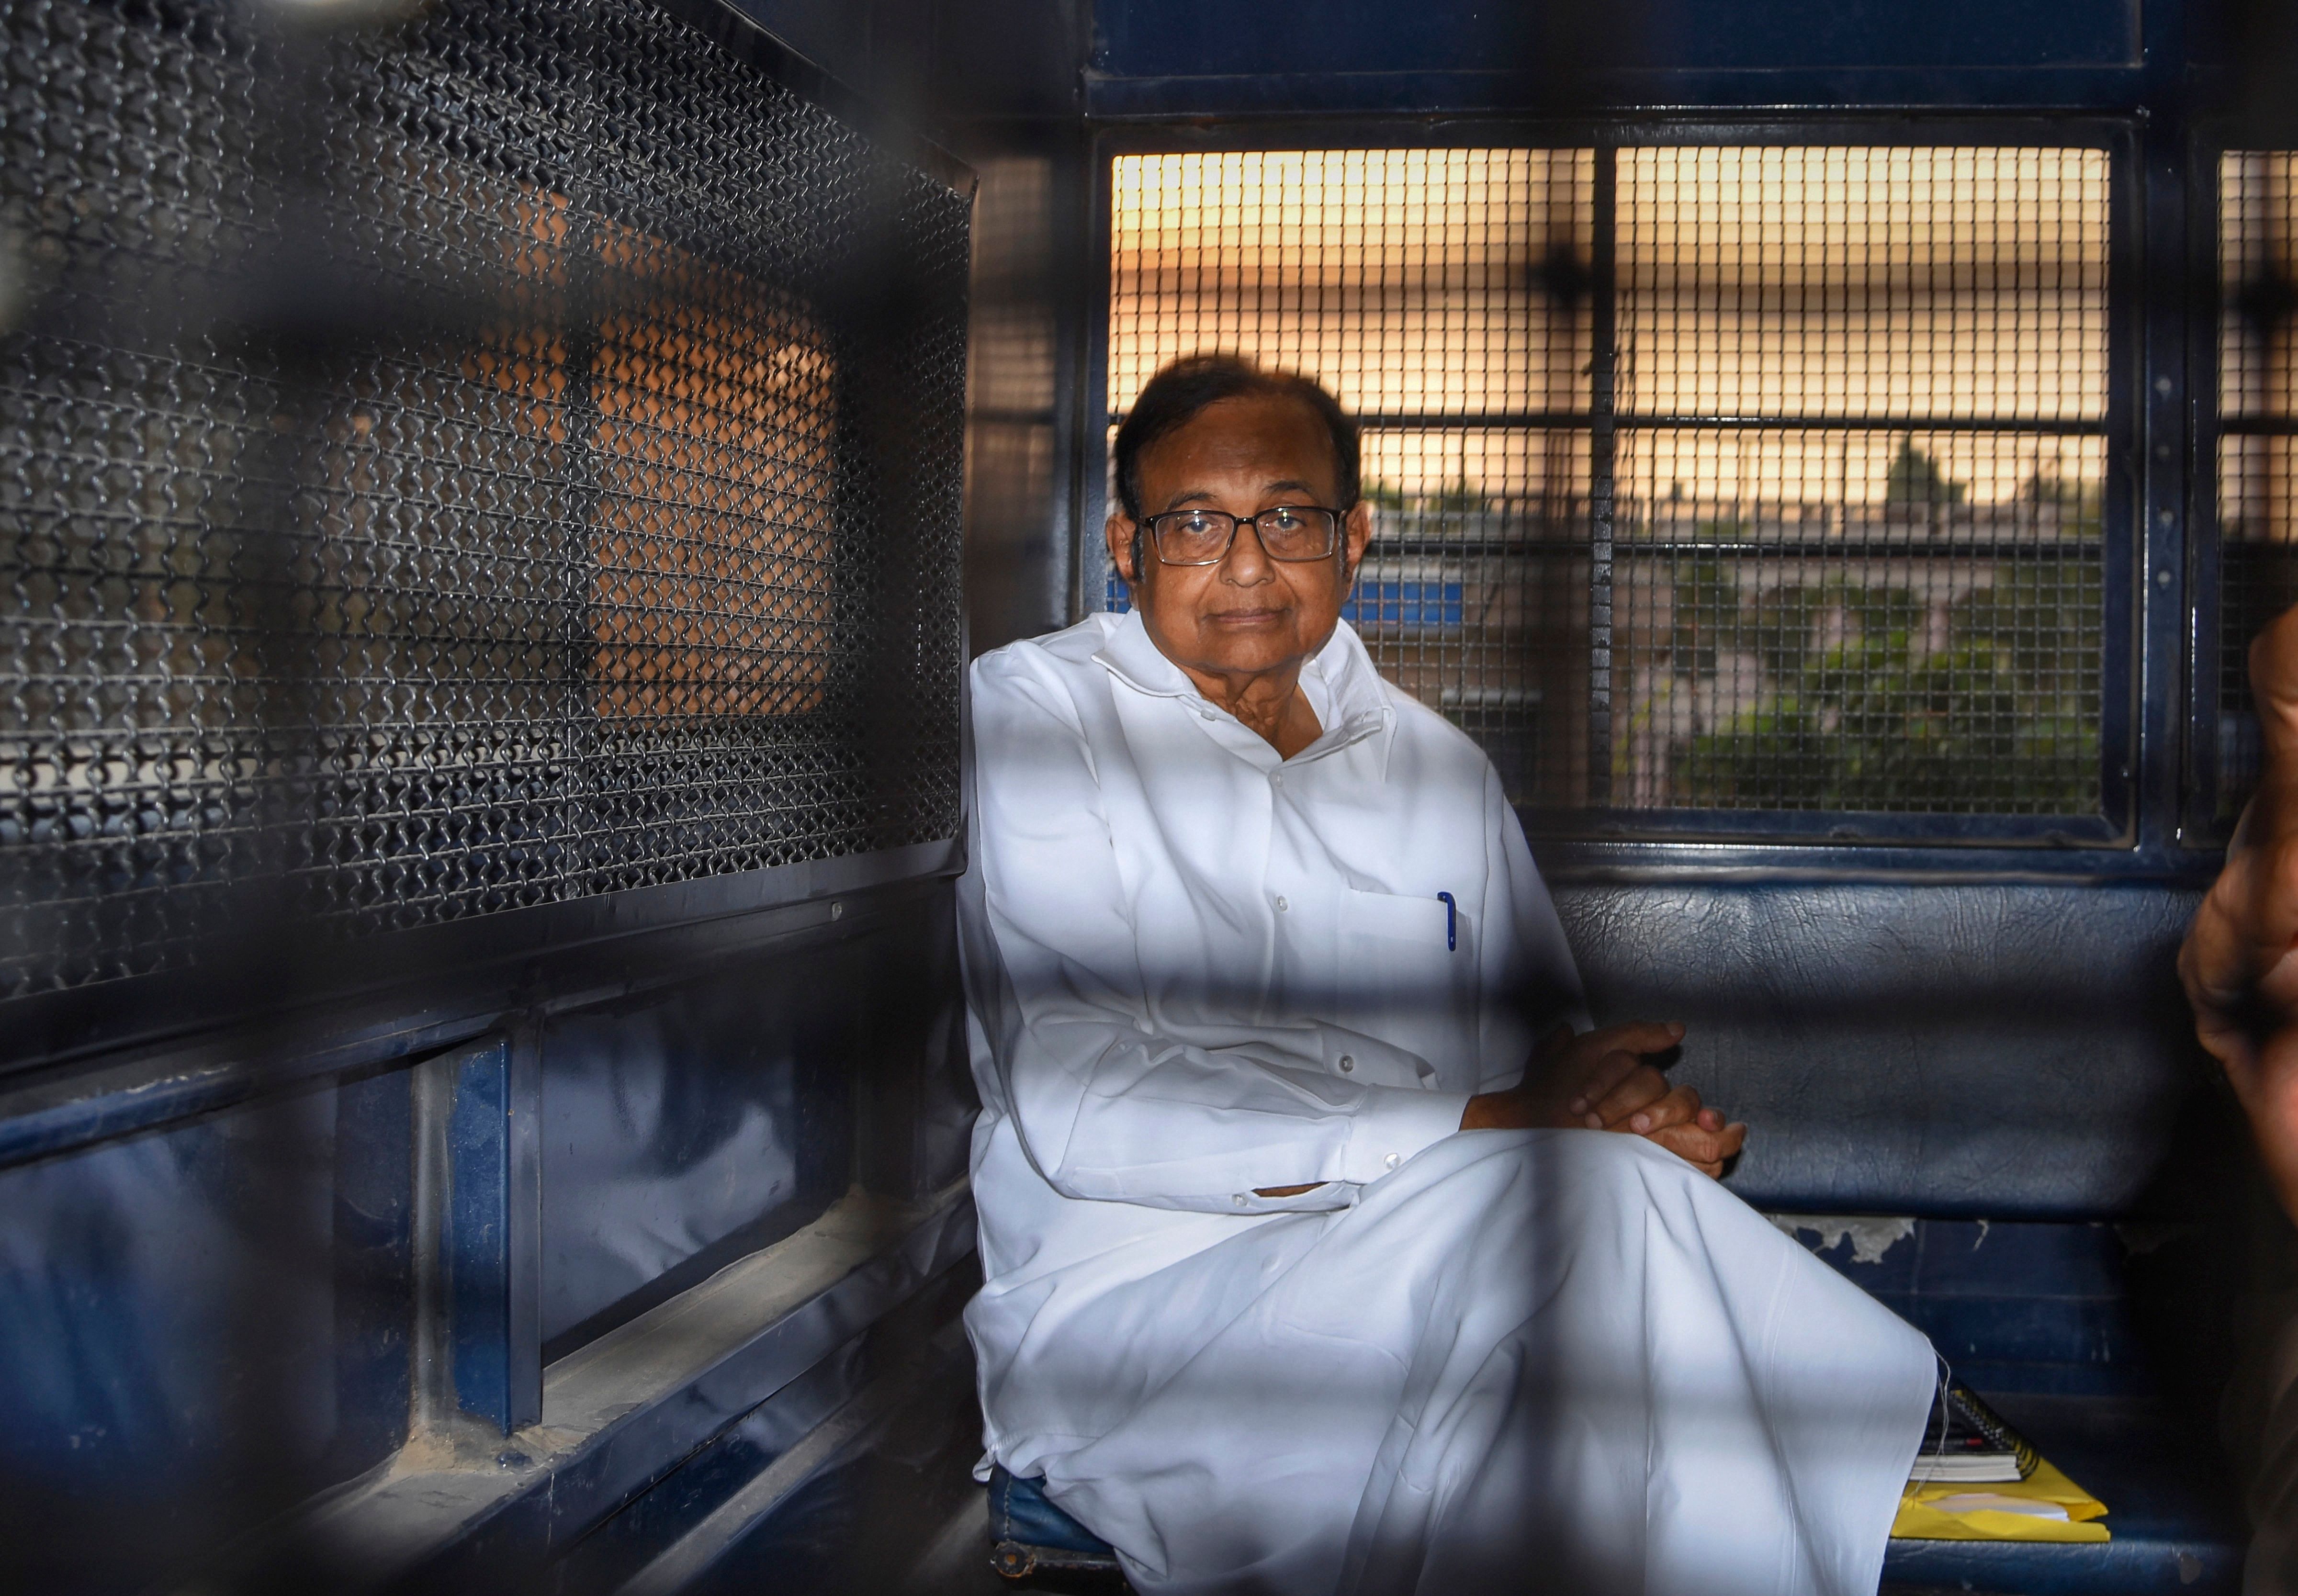 Senior Congress leader and former finance minister P Chidambaram after being produced in the Rouse Avenue Court in connection with the INX Media corruption case, in New Delhi. (PTI Photo)